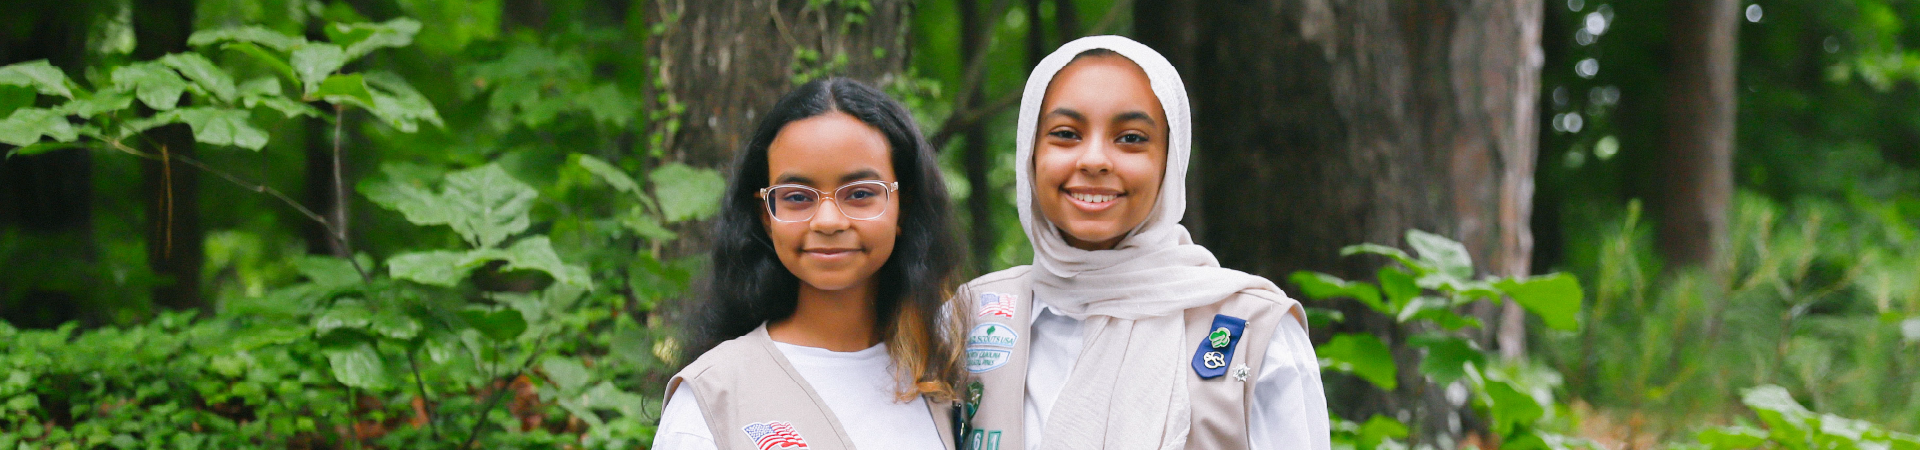  group of two older girl scouts smiling near foliage 